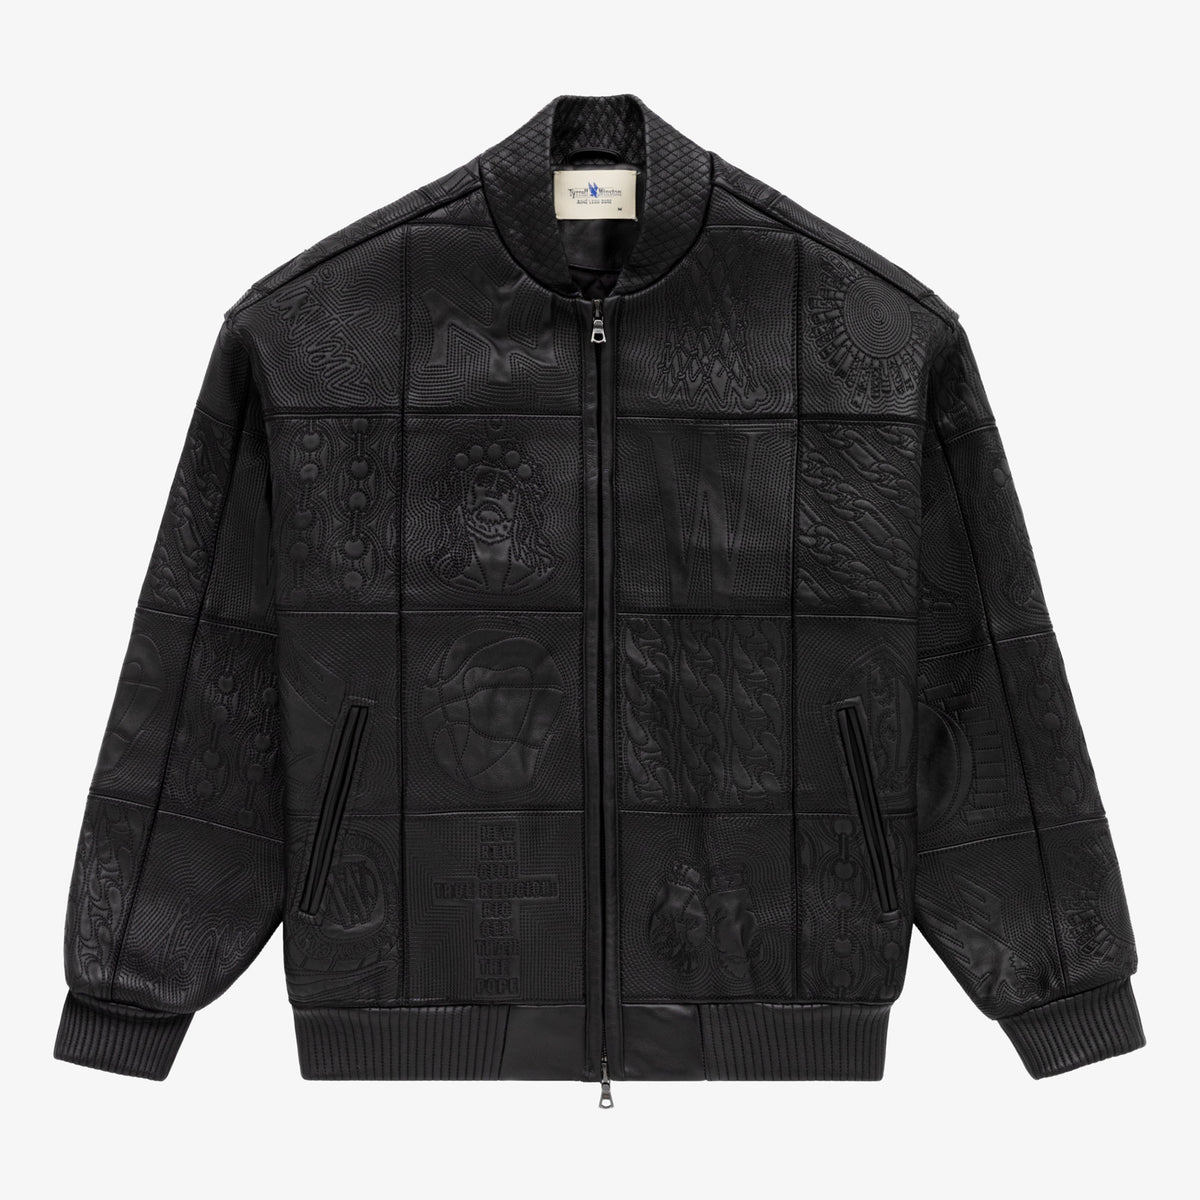 Embroidered Leather Bomber at AimeLeonDore.com